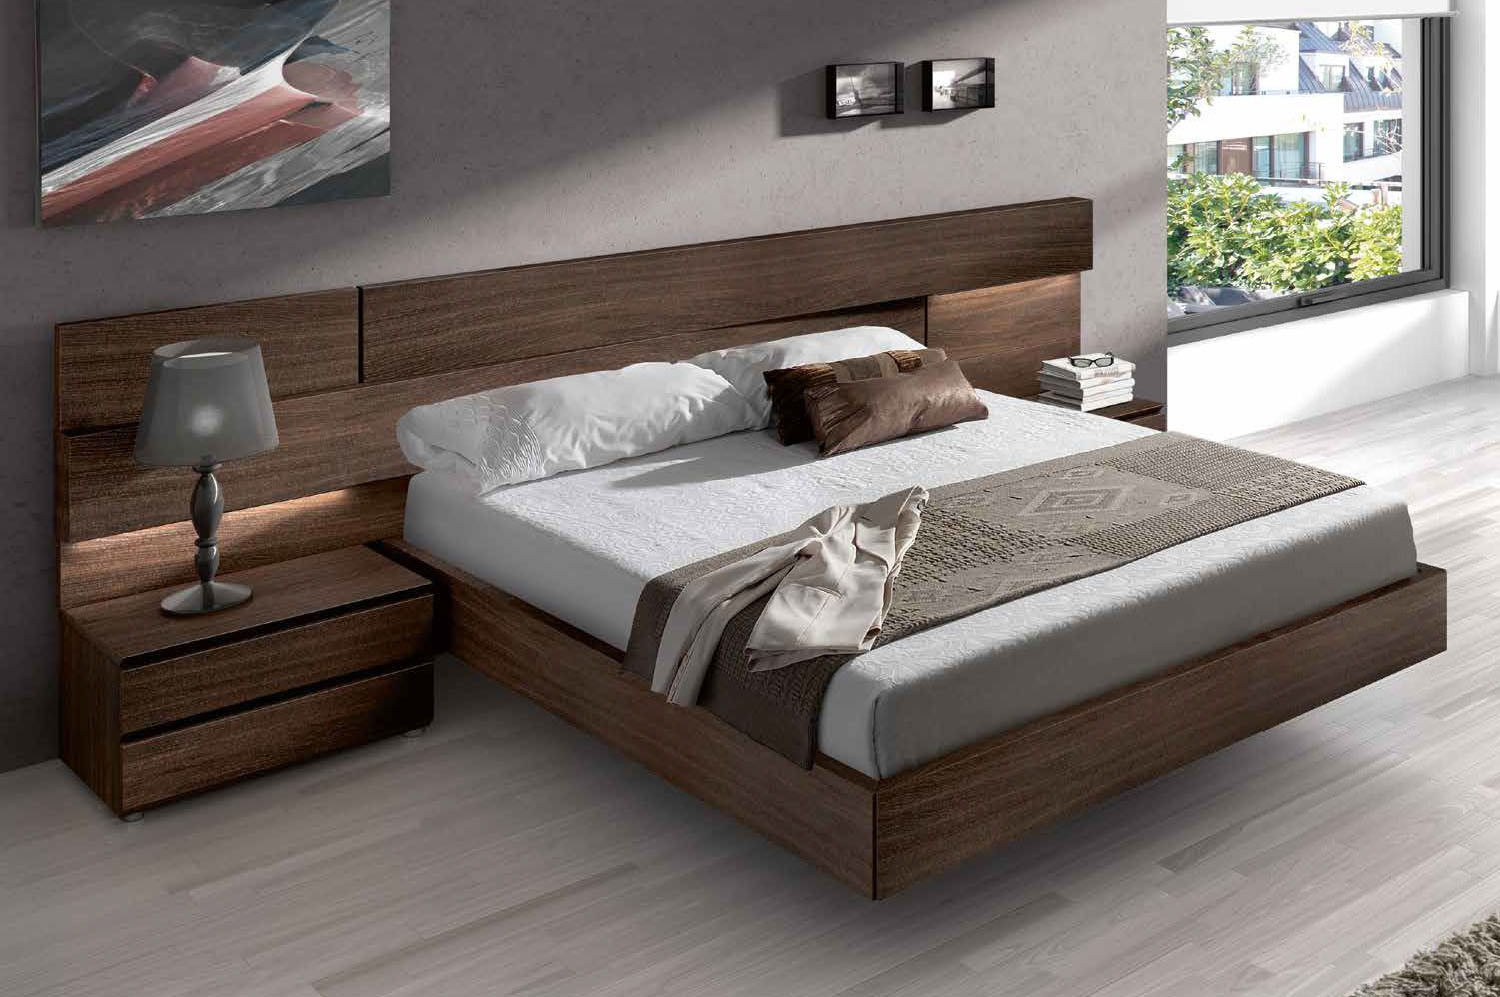 Modern Wood Bedroom Furniture
 Made in Spain Wood High End Platform Bed with Extra